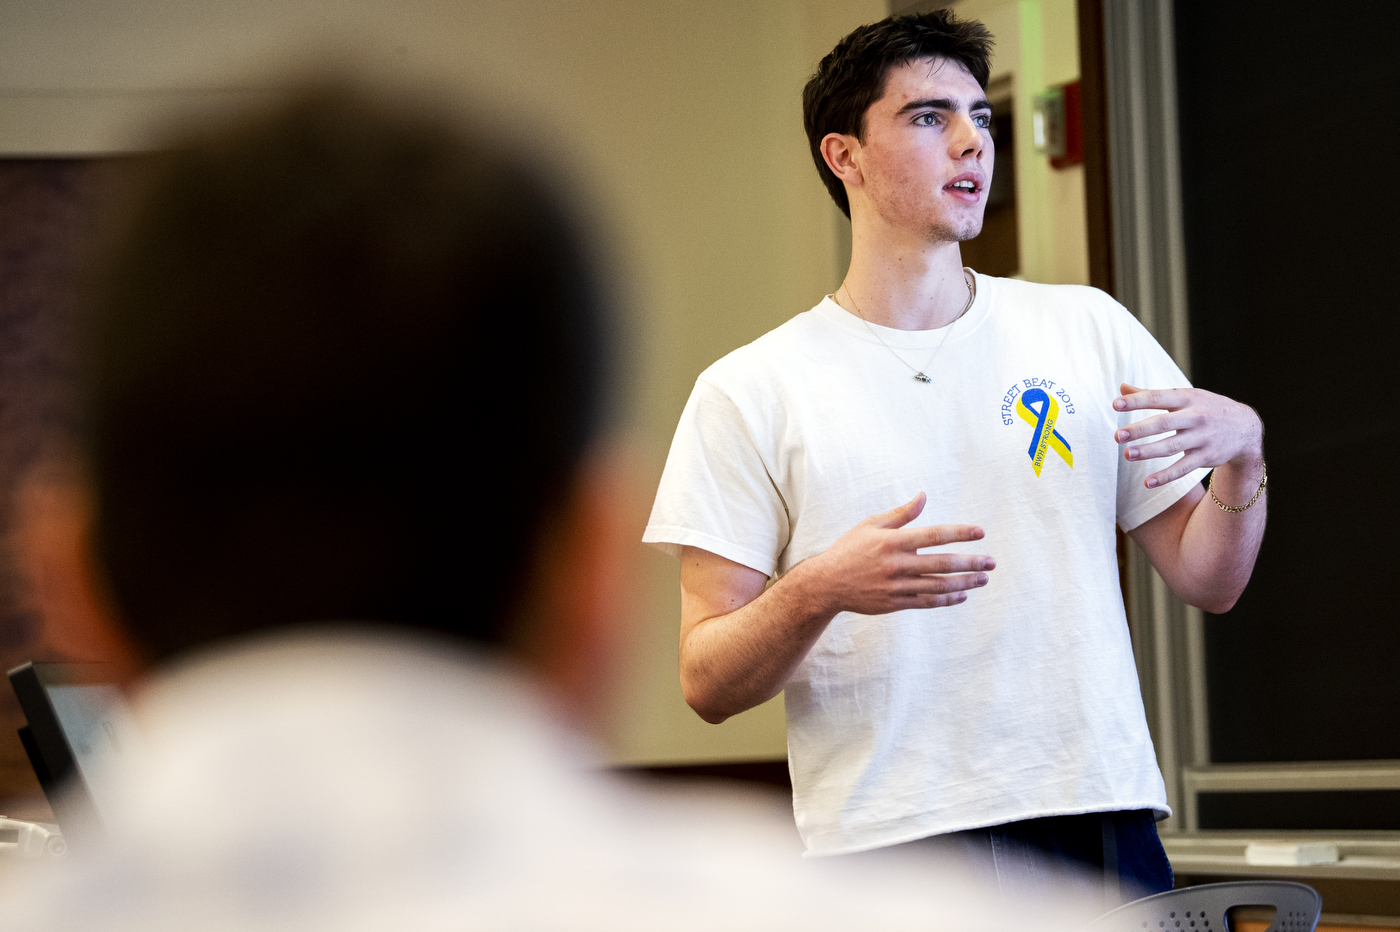 student wearing white t-shirt gesturing with his hands while presenting